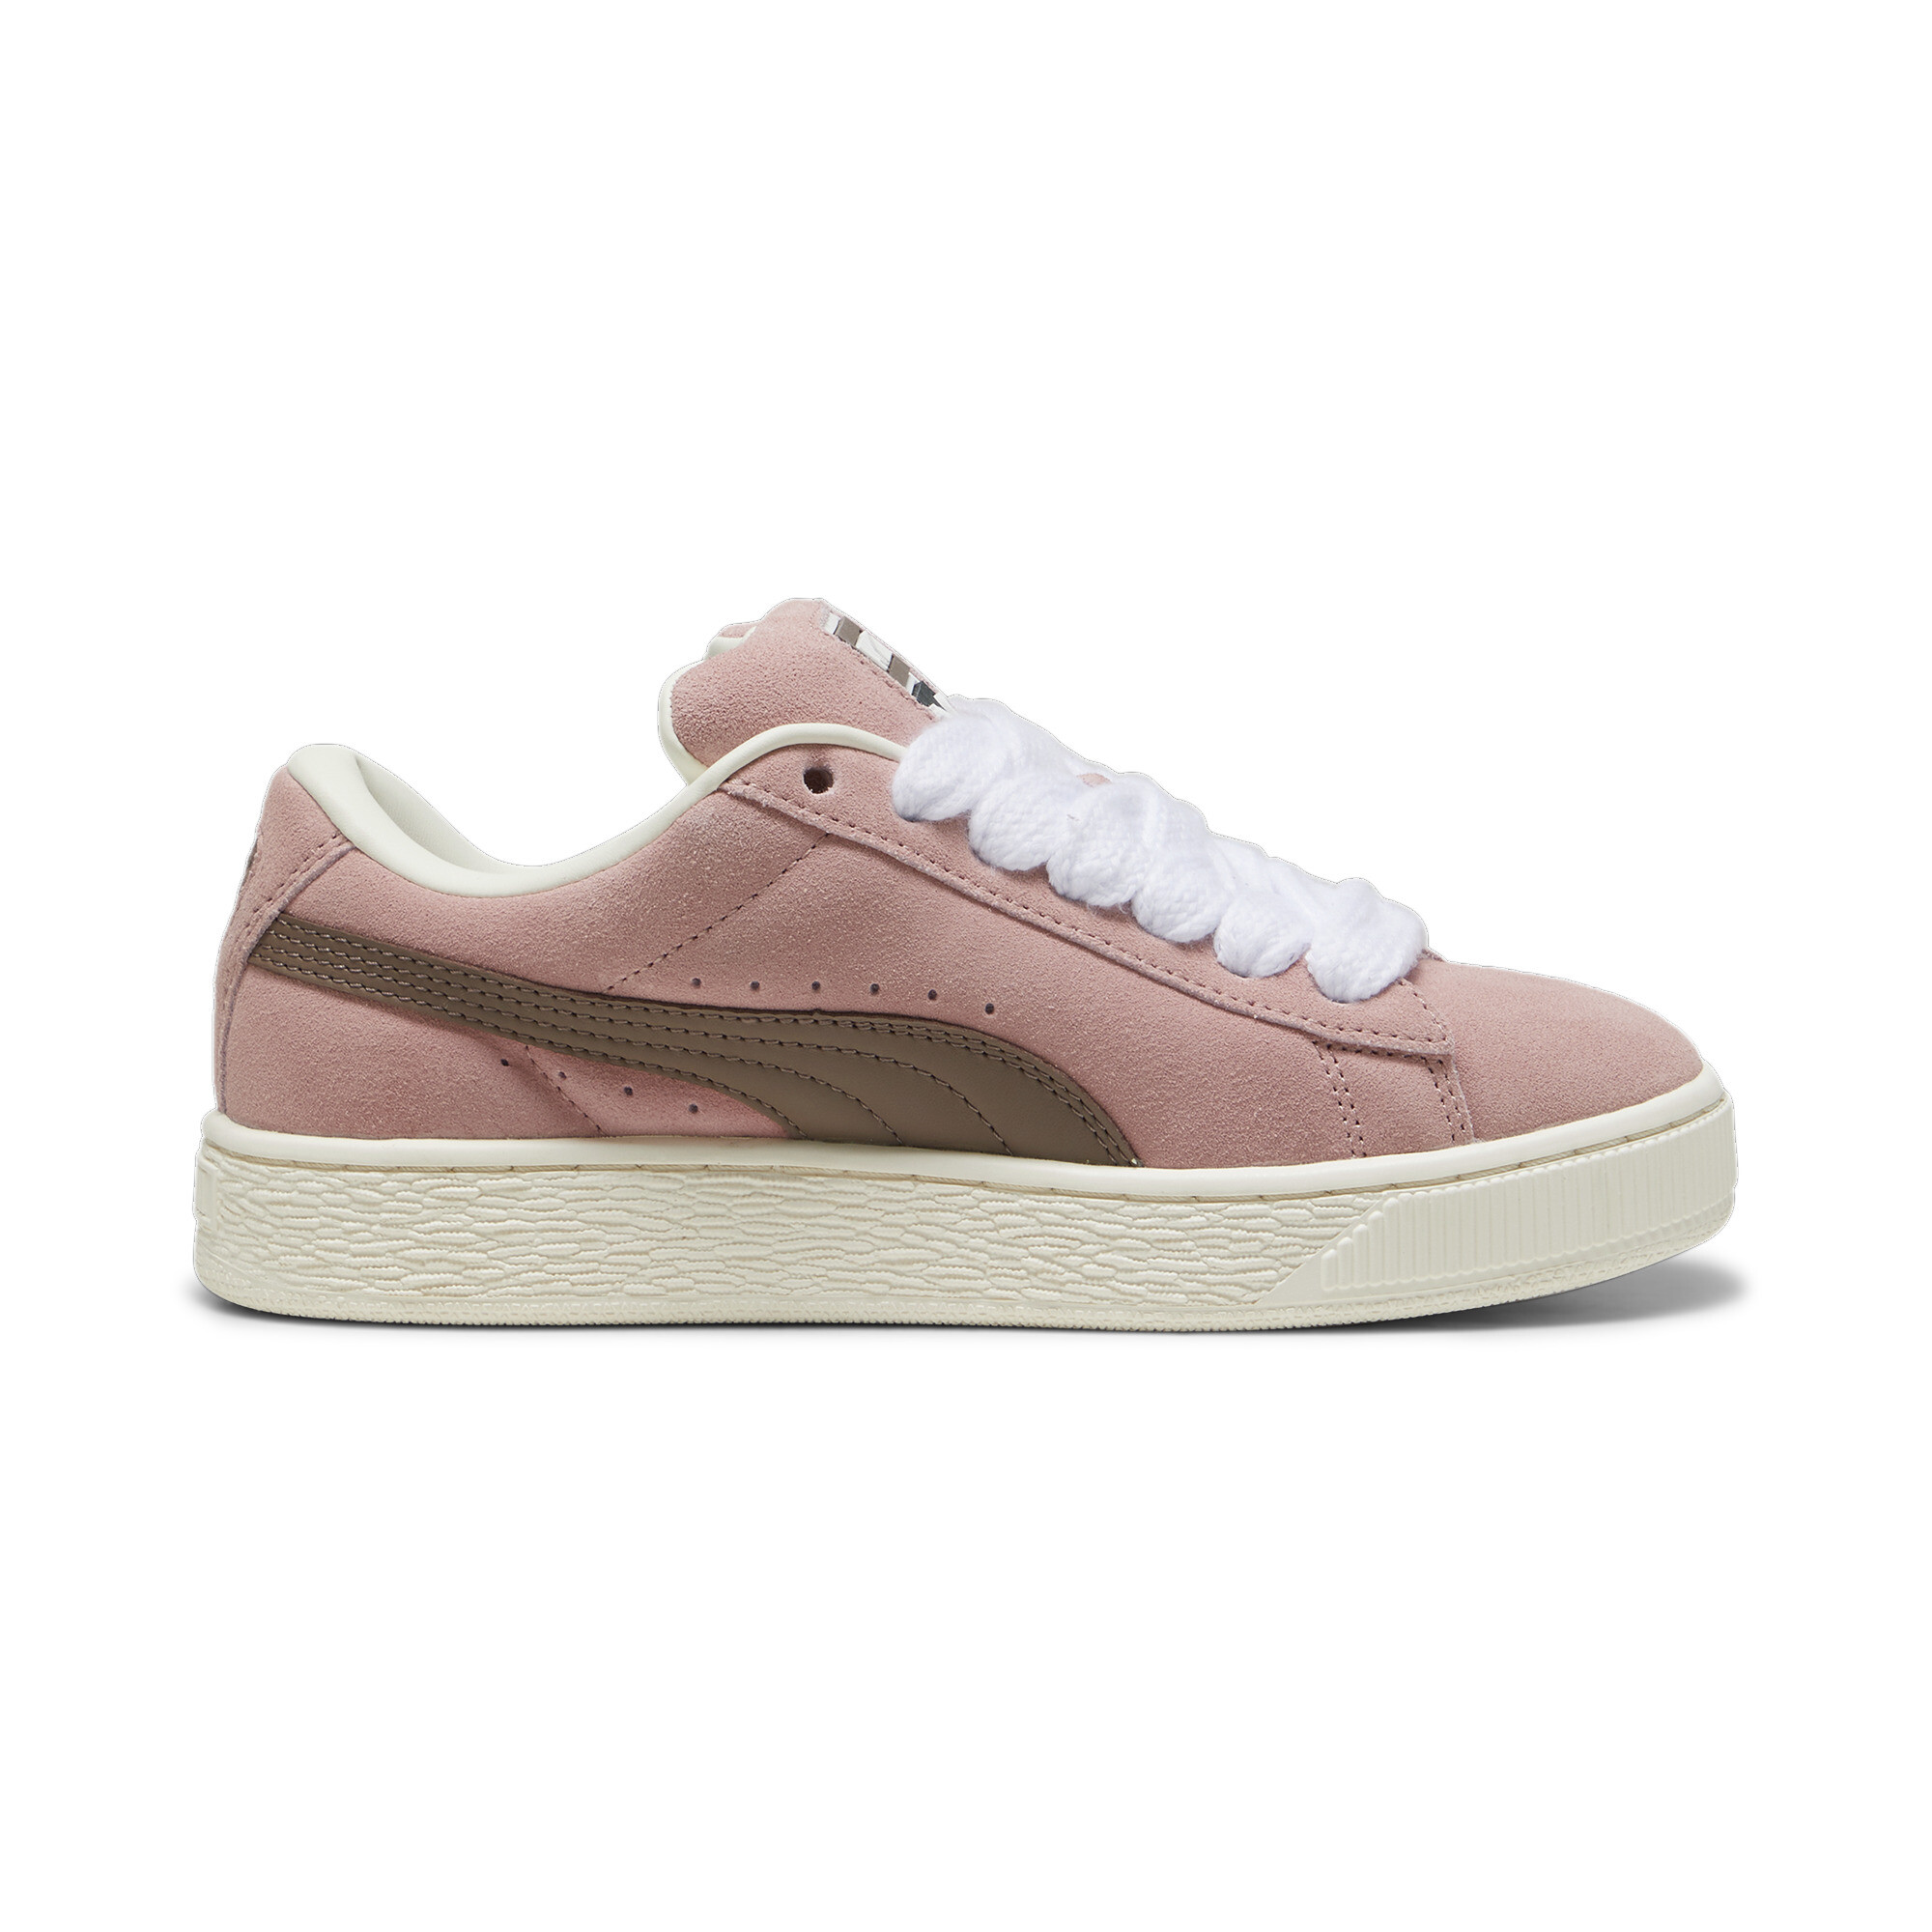 Puma Suede XL Sneakers Unisex, Pink, Size 41, Shoes